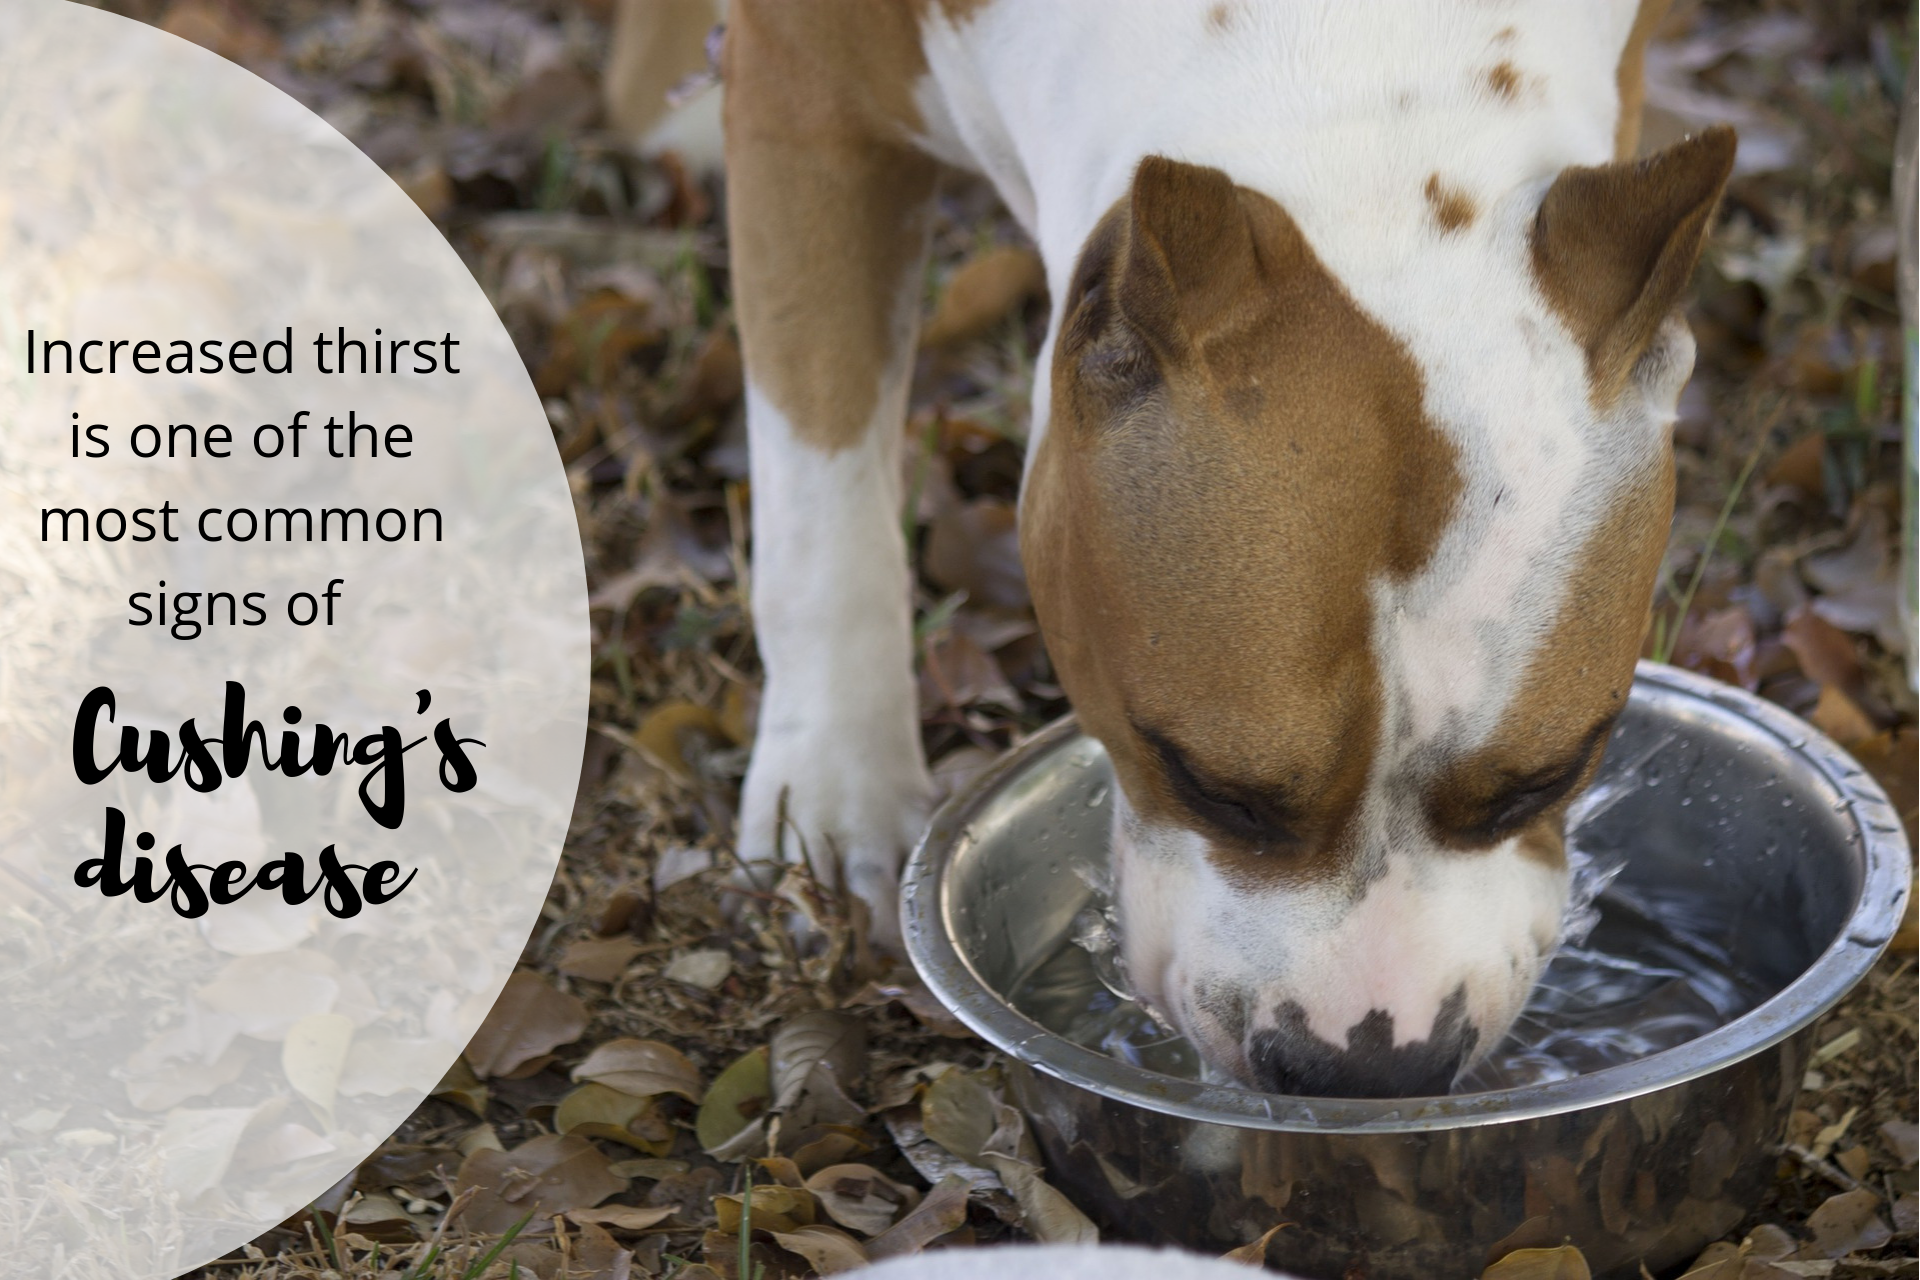 Increased thirst is one of the most common signs of Cushing's disease.